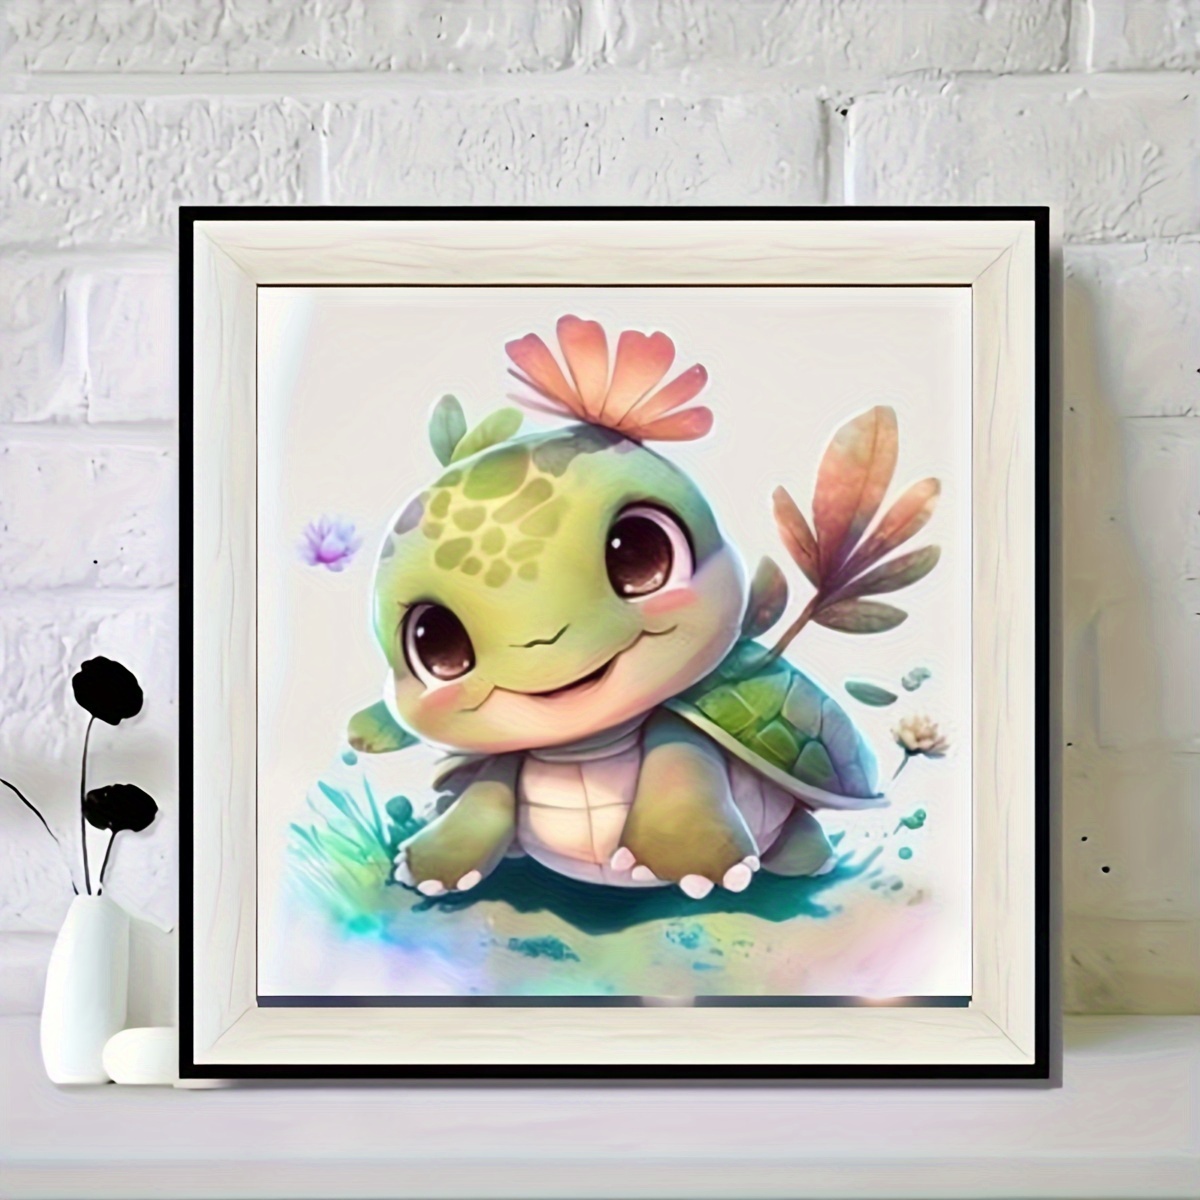 

Beautiful Cute Little Turtle Diamond Painting Tools For Adults Diamond Painting Art Decor Gifts For Home Wall Artworks, Crafts